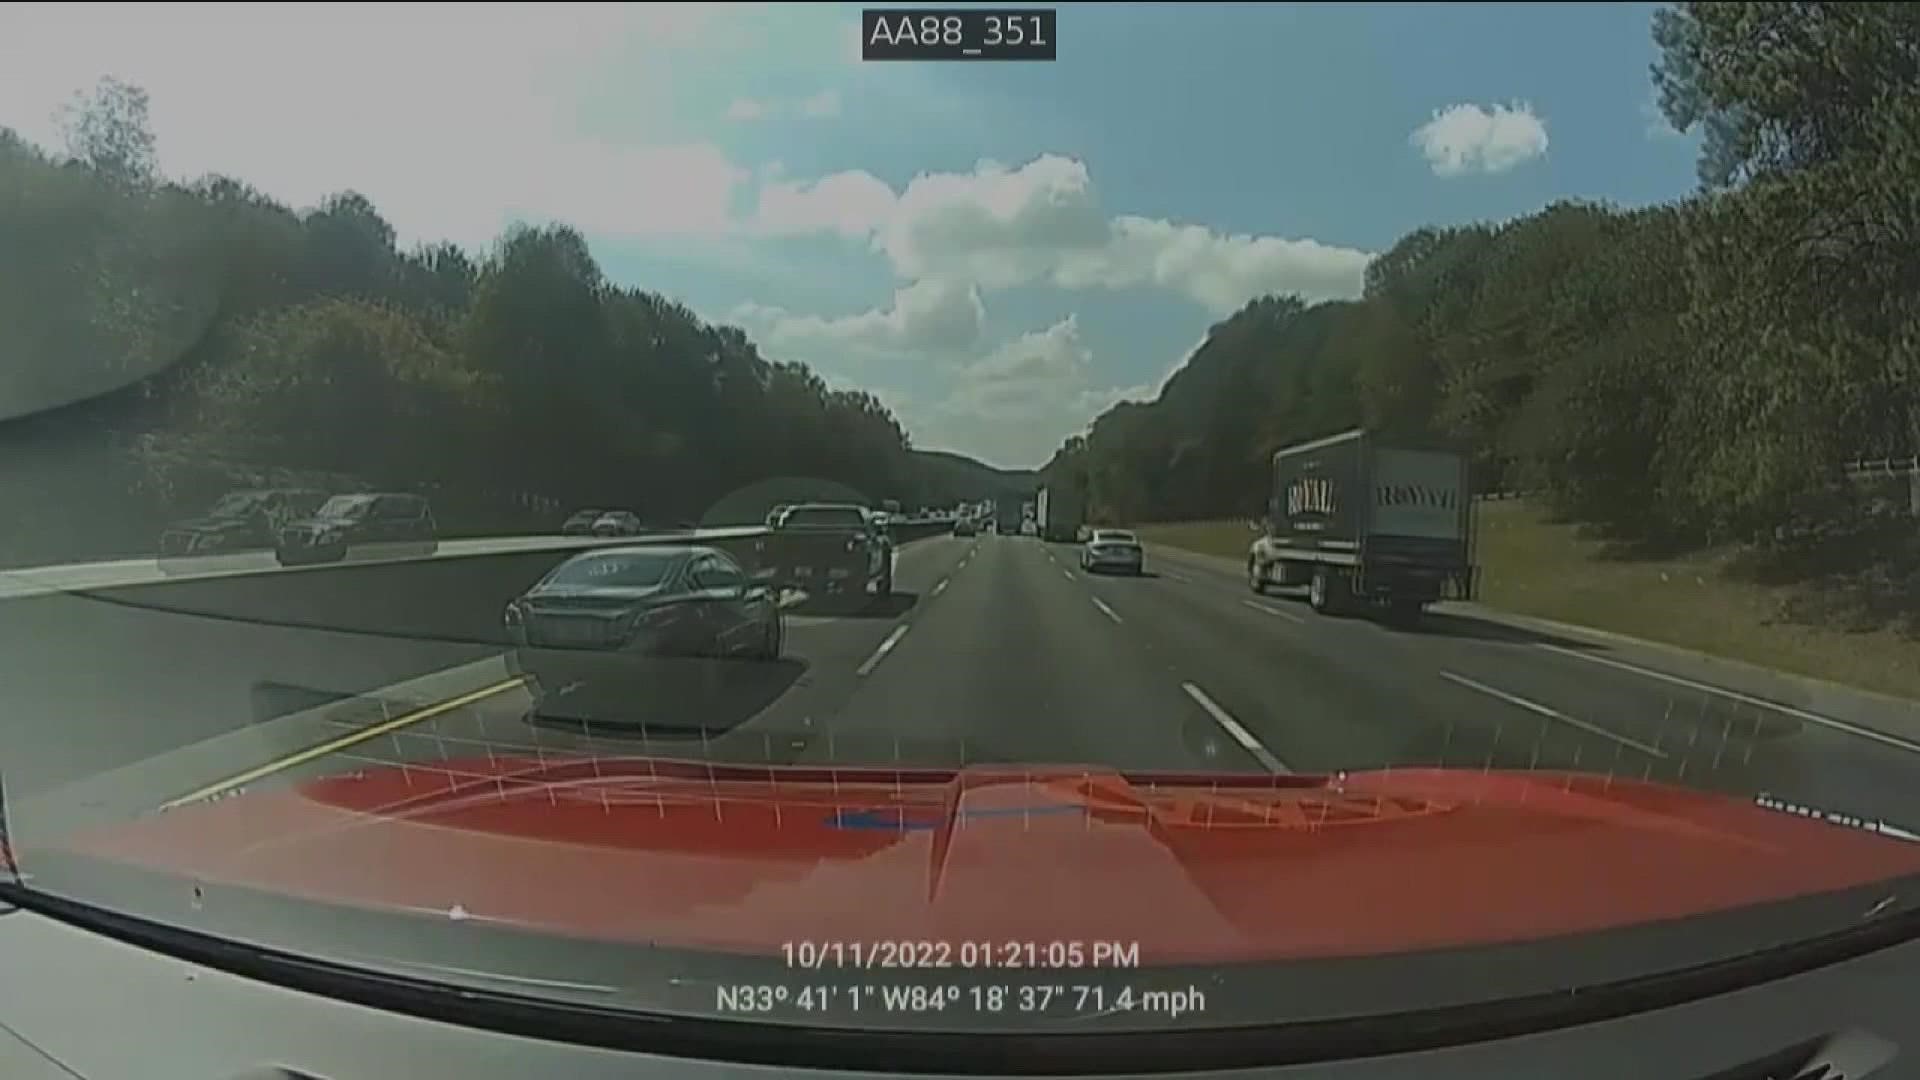 Daniel Booth was shot and killed as he was trying to exit I-285 onto I-675 in Dekalb County on Oct. 11, 2022. DKPD hopes dashcam video will generate new leads.